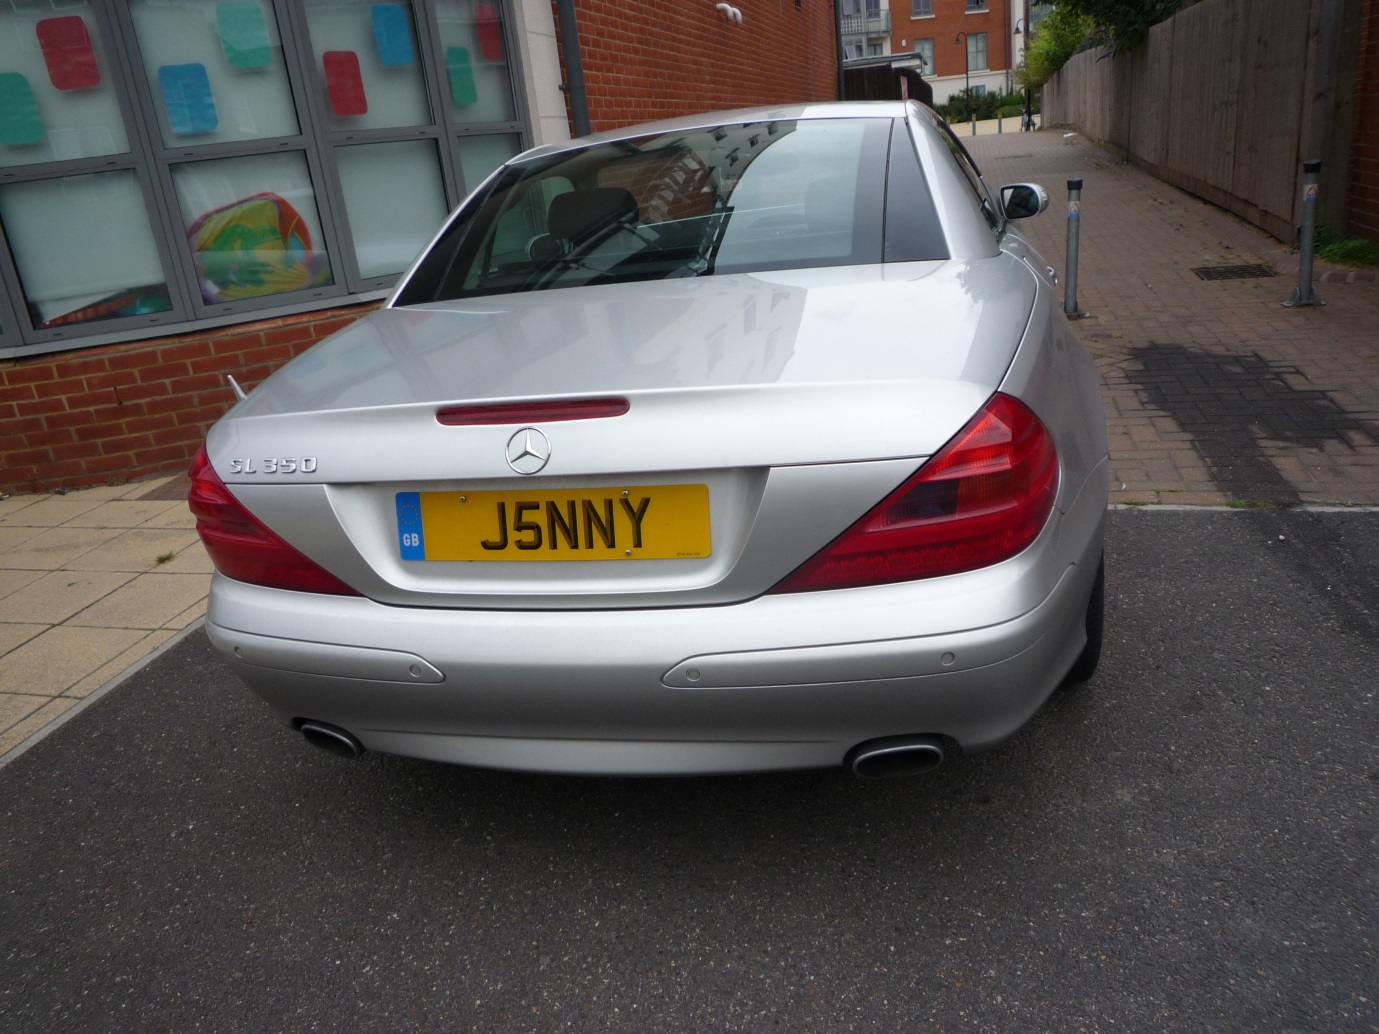 How to Create a Personalised Number Plate